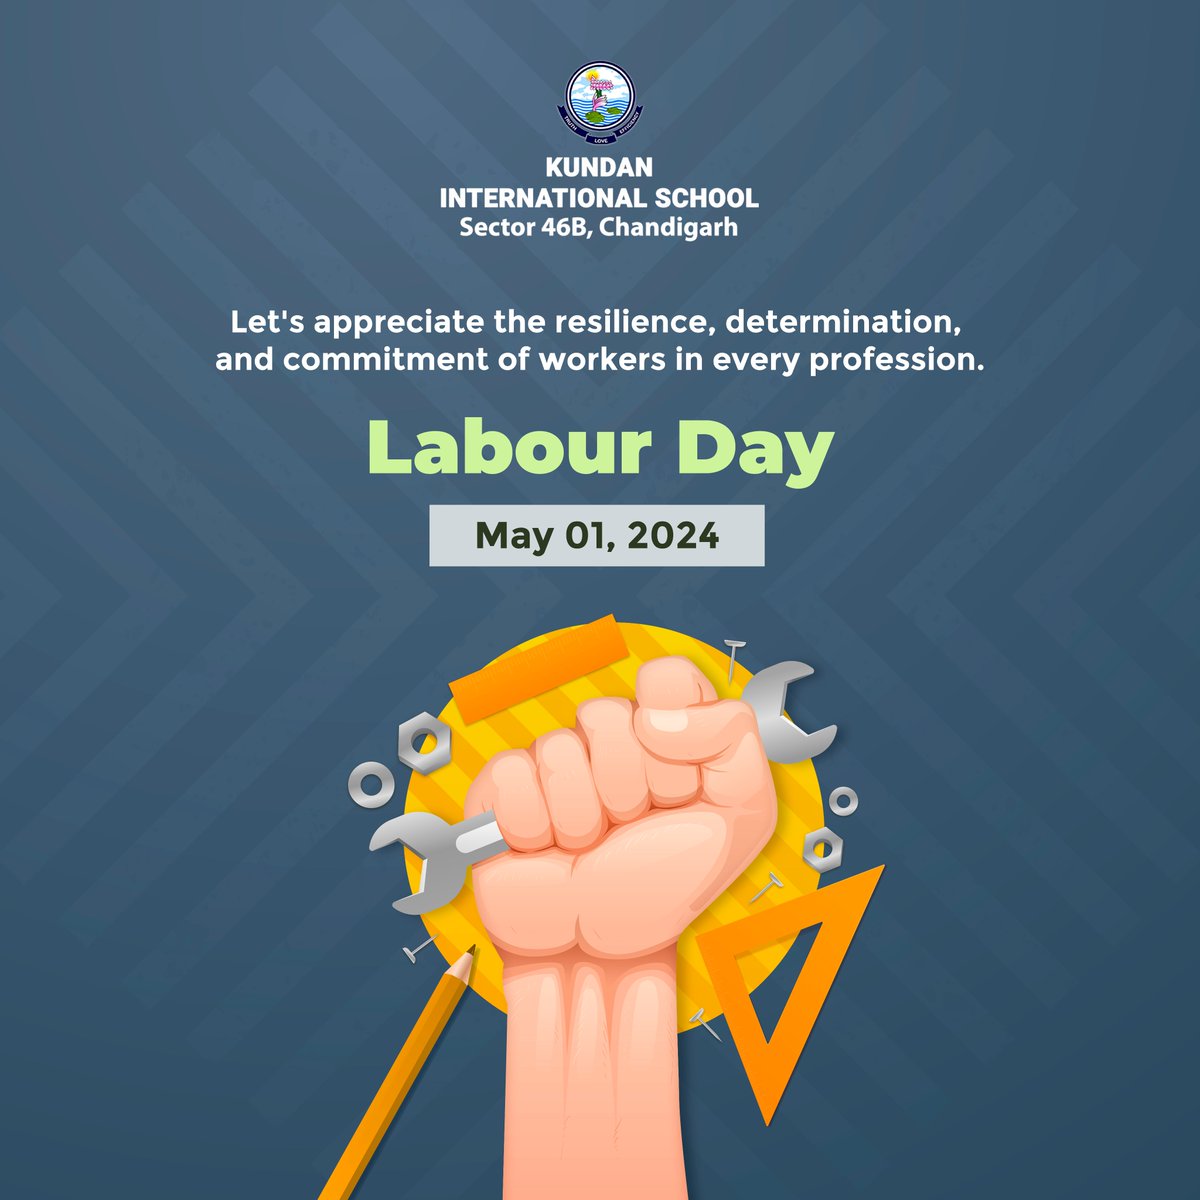 Labour Day is a time to recognise and appreciate the efforts of workers who contribute to the strength and prosperity of our communities✨💼

#LabourDay #KundanInternationalSchool #SchoolInChandigarh #SchoolSpirit #BlendedLearning #Curriculum #EducationIsTheKey #SchoolLife